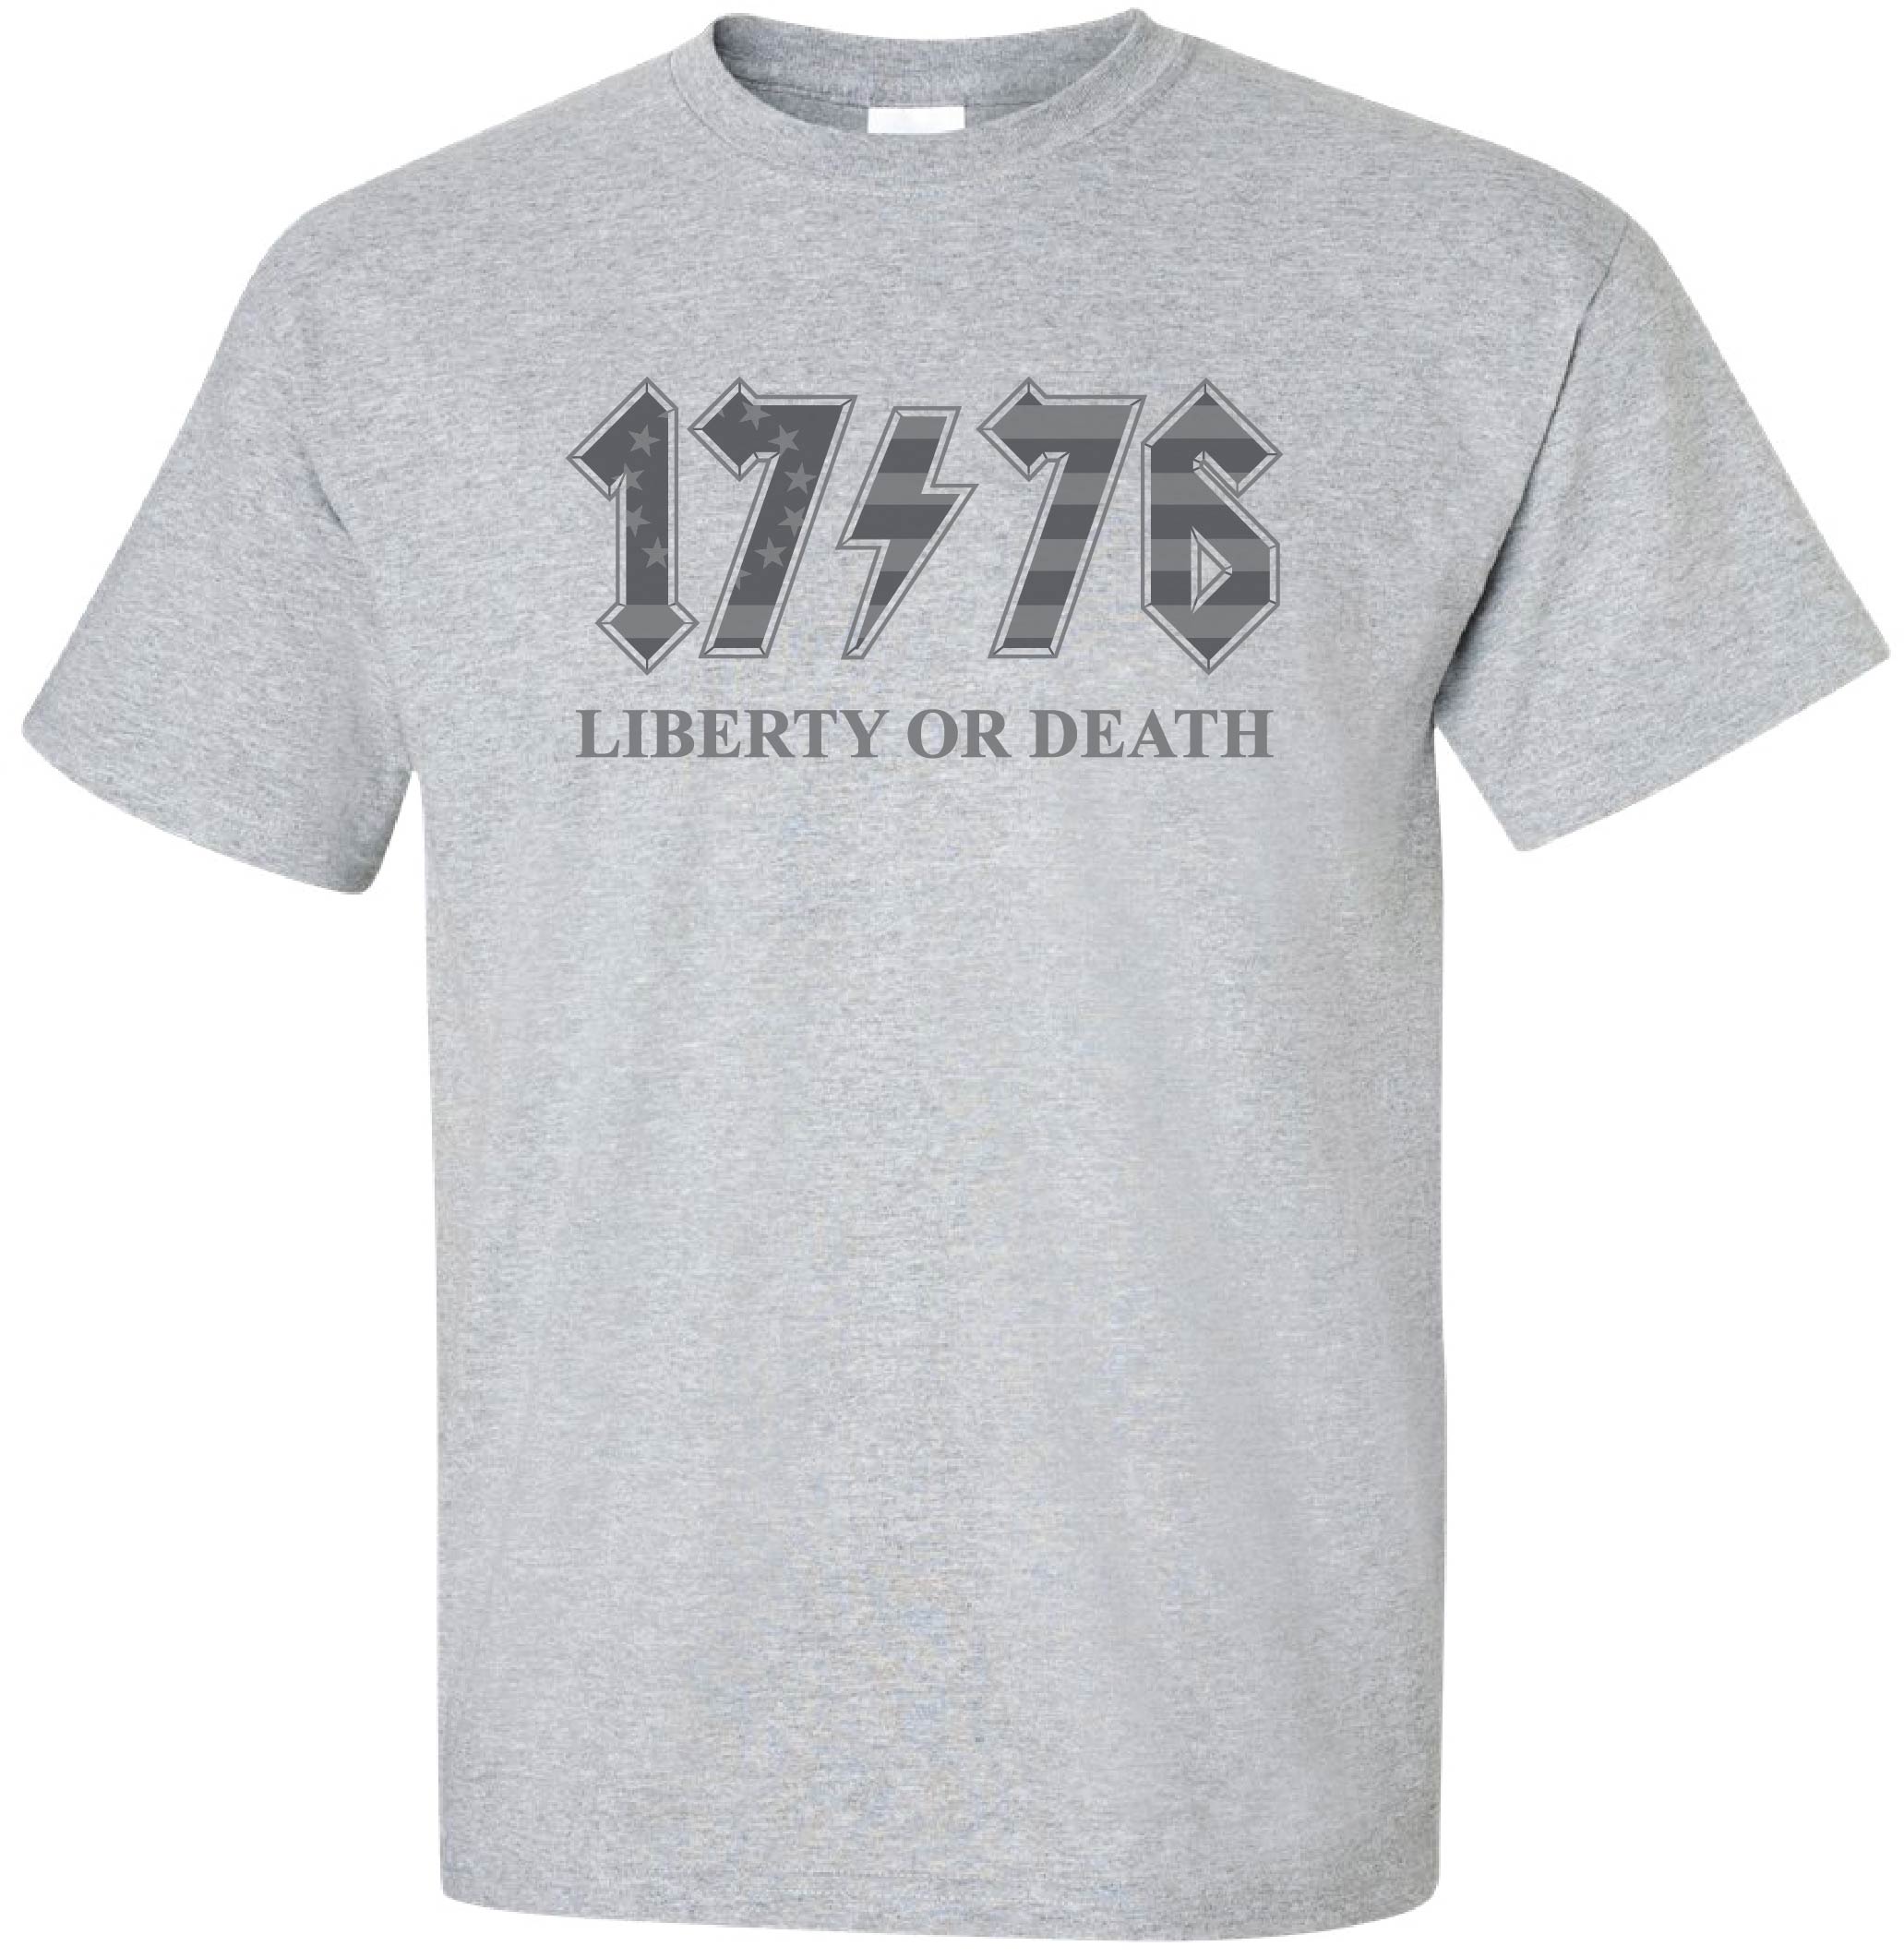 "1776" - Rock INDEPENDENCE Betsy T-Shirt